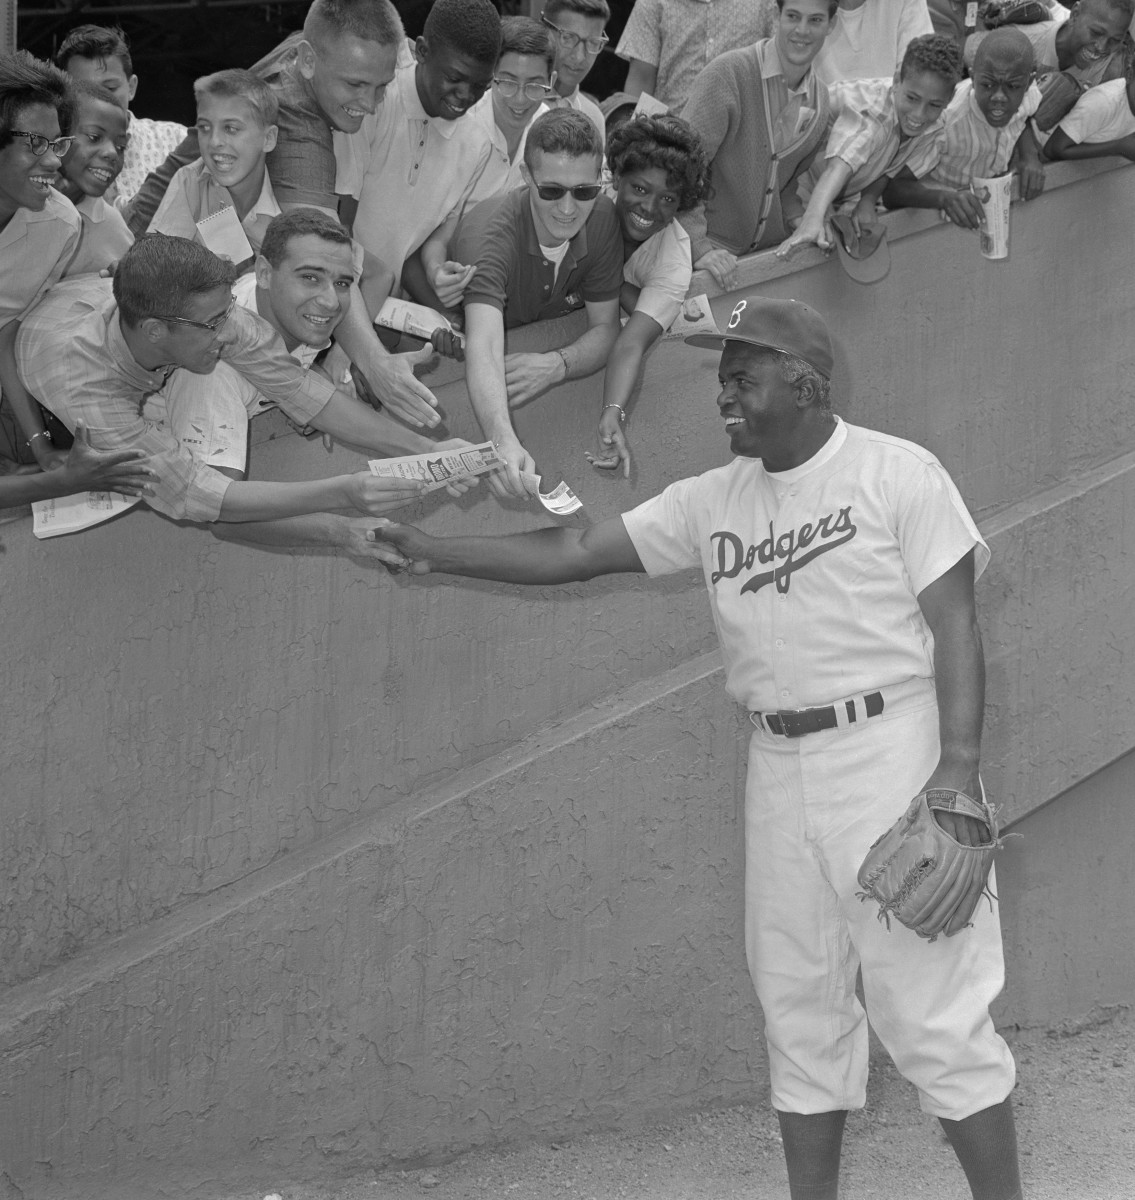 AFTER JACKIE: New book highlights 15 black pioneers who followed Jackie  Robinson's path to major leagues - Sports Collectors Digest